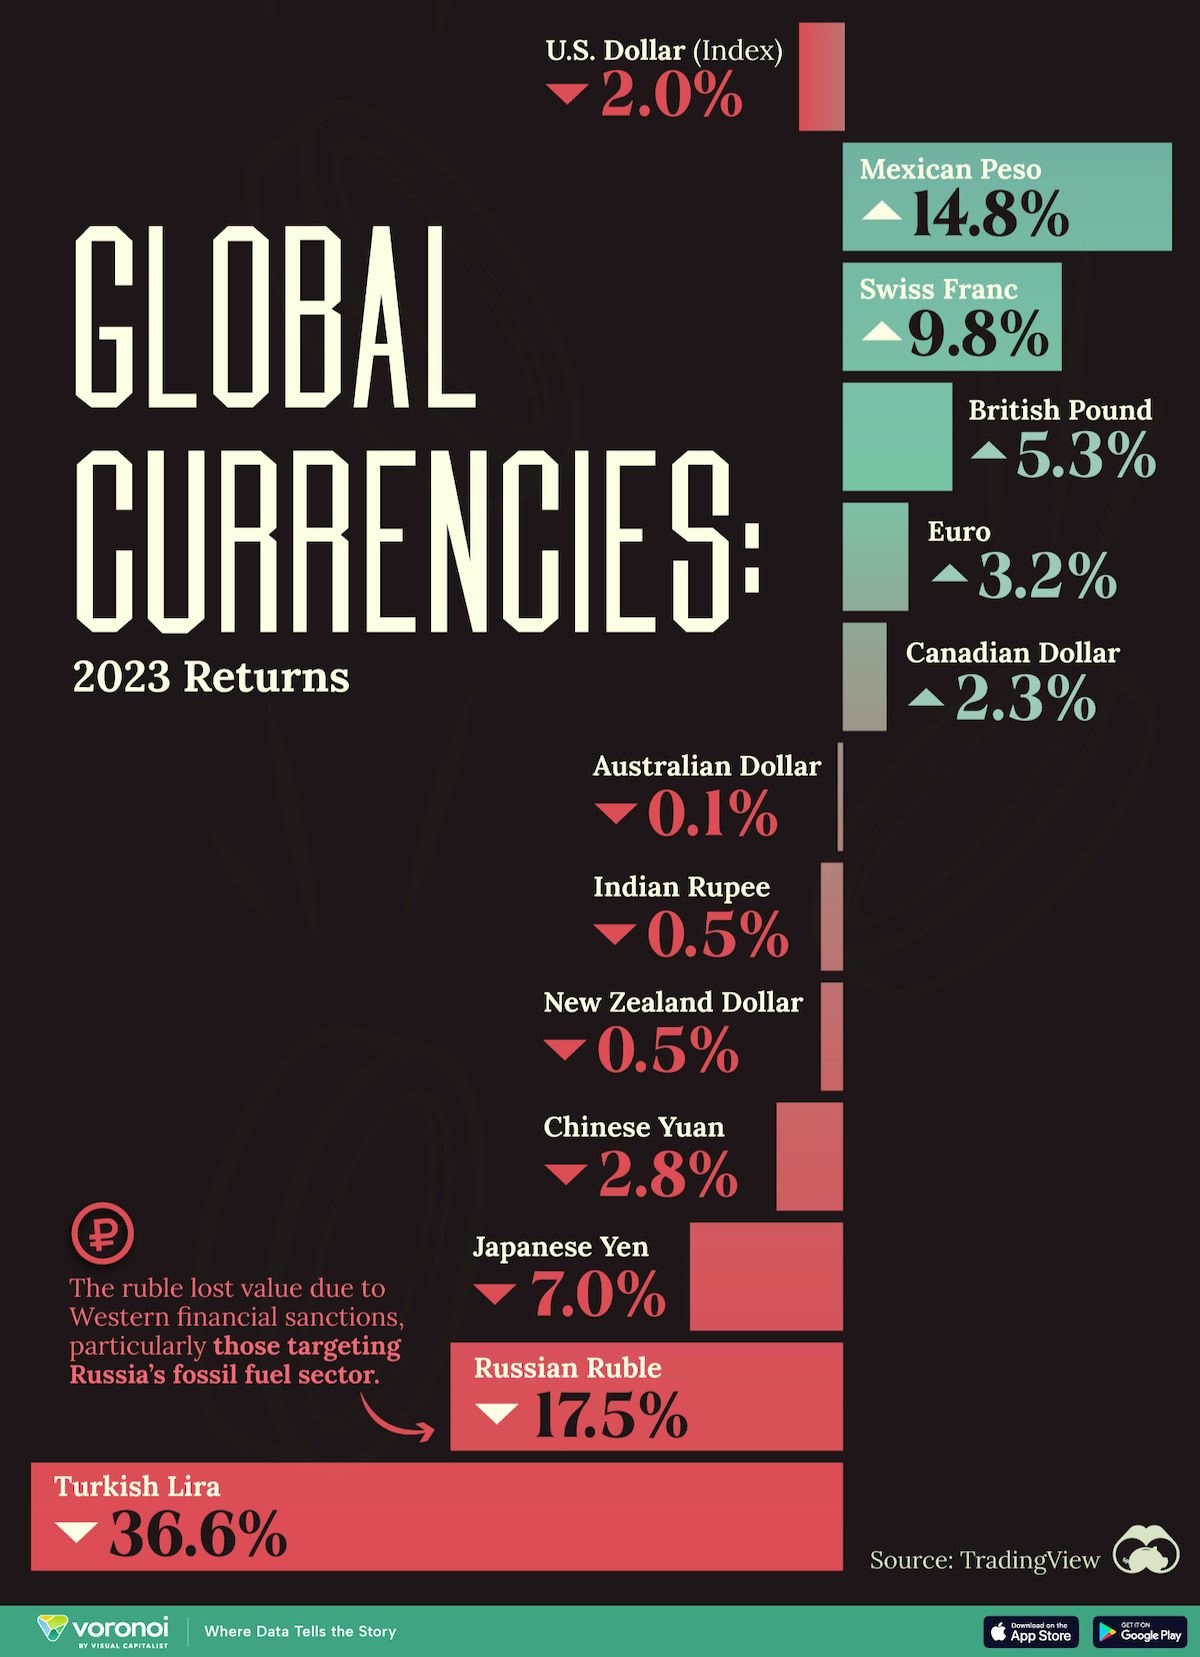 A bar chart showing the 2023 return of major currencies against the U.S. dollar.